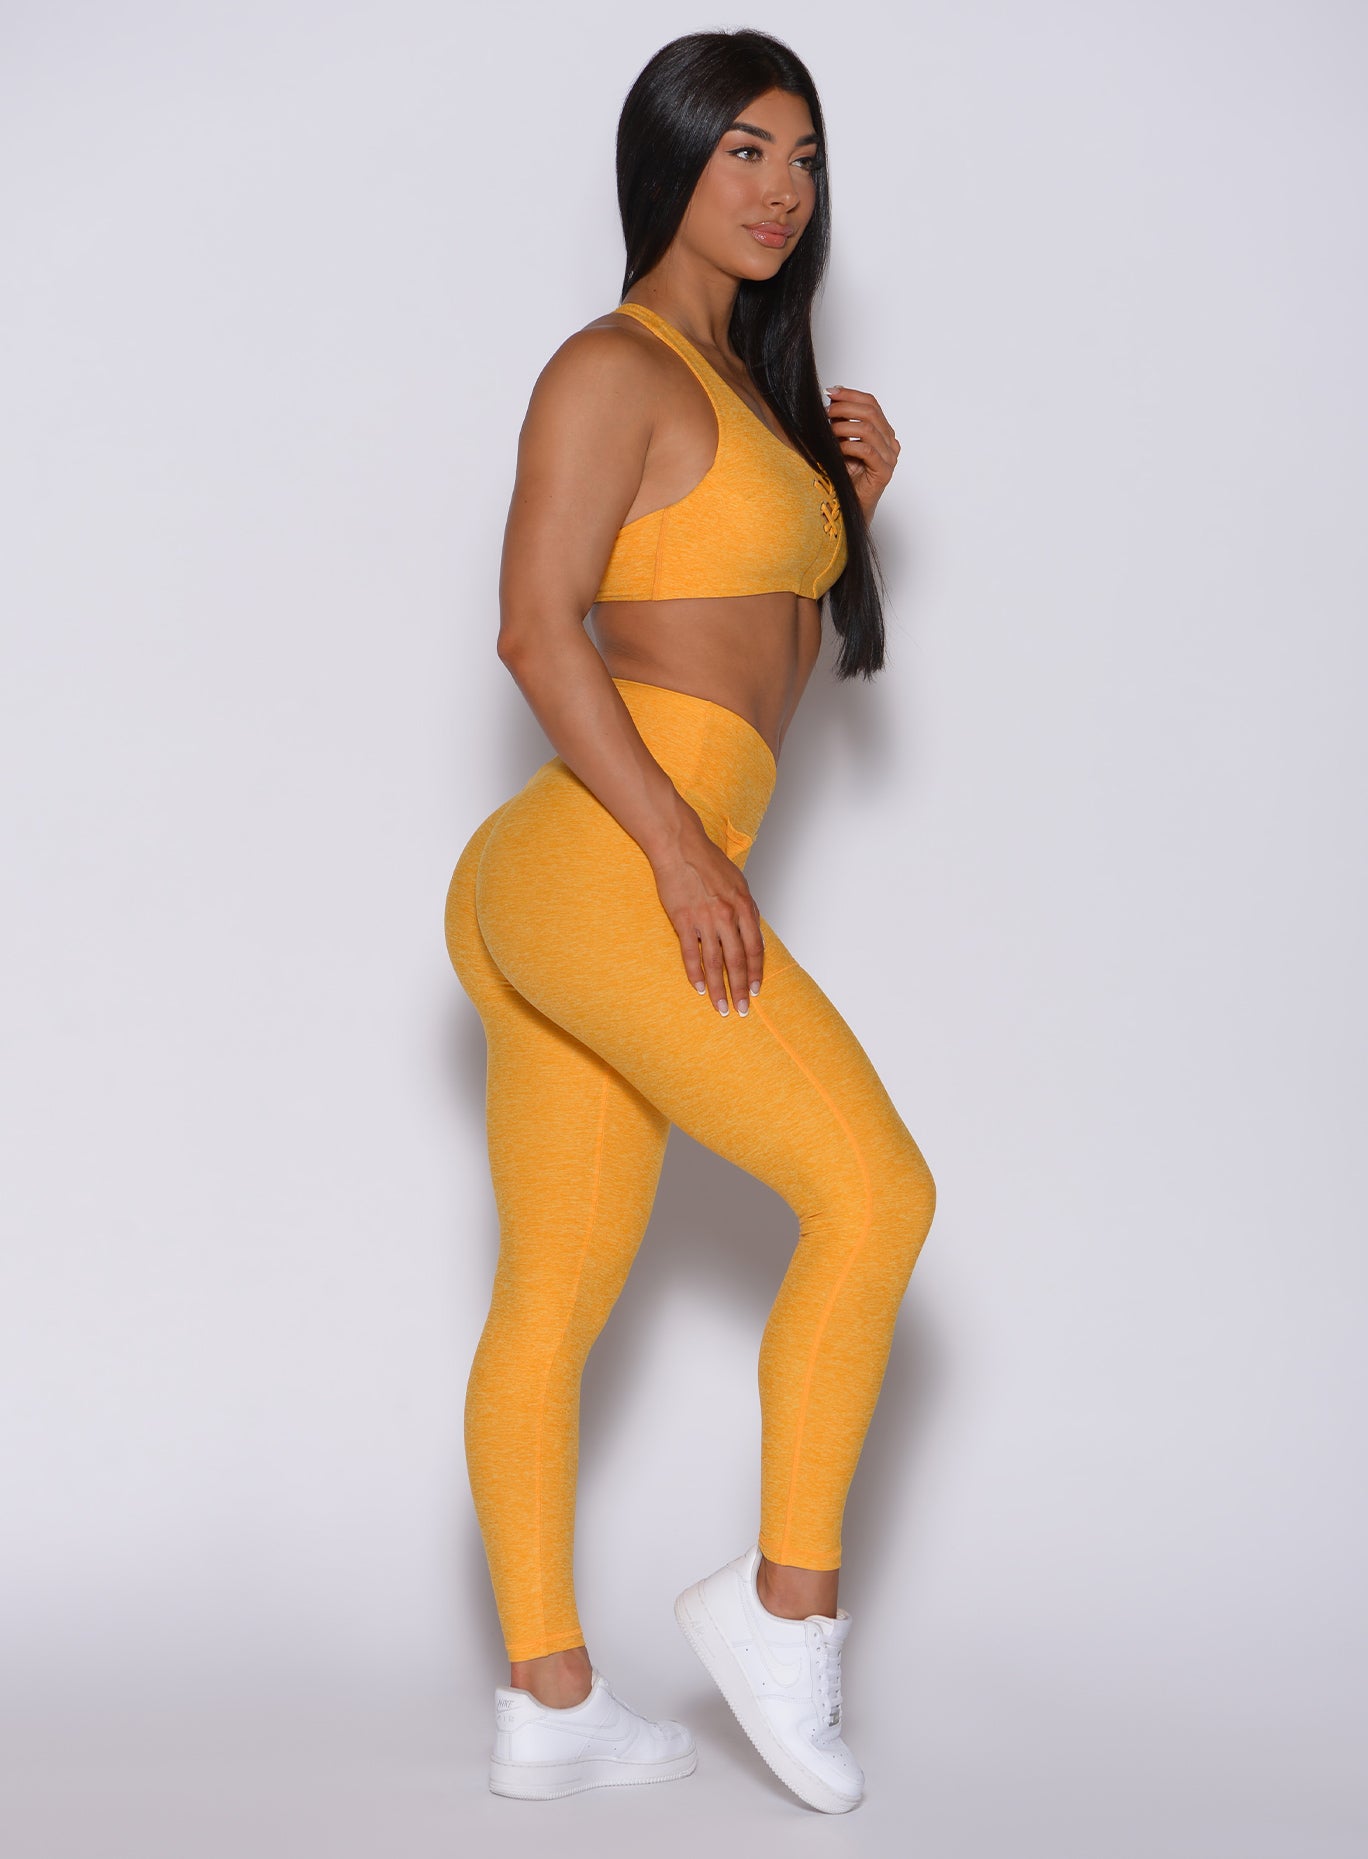 Right side  profile view of a model wearing our V scrunch leggings in sinkissed color and a matching bra